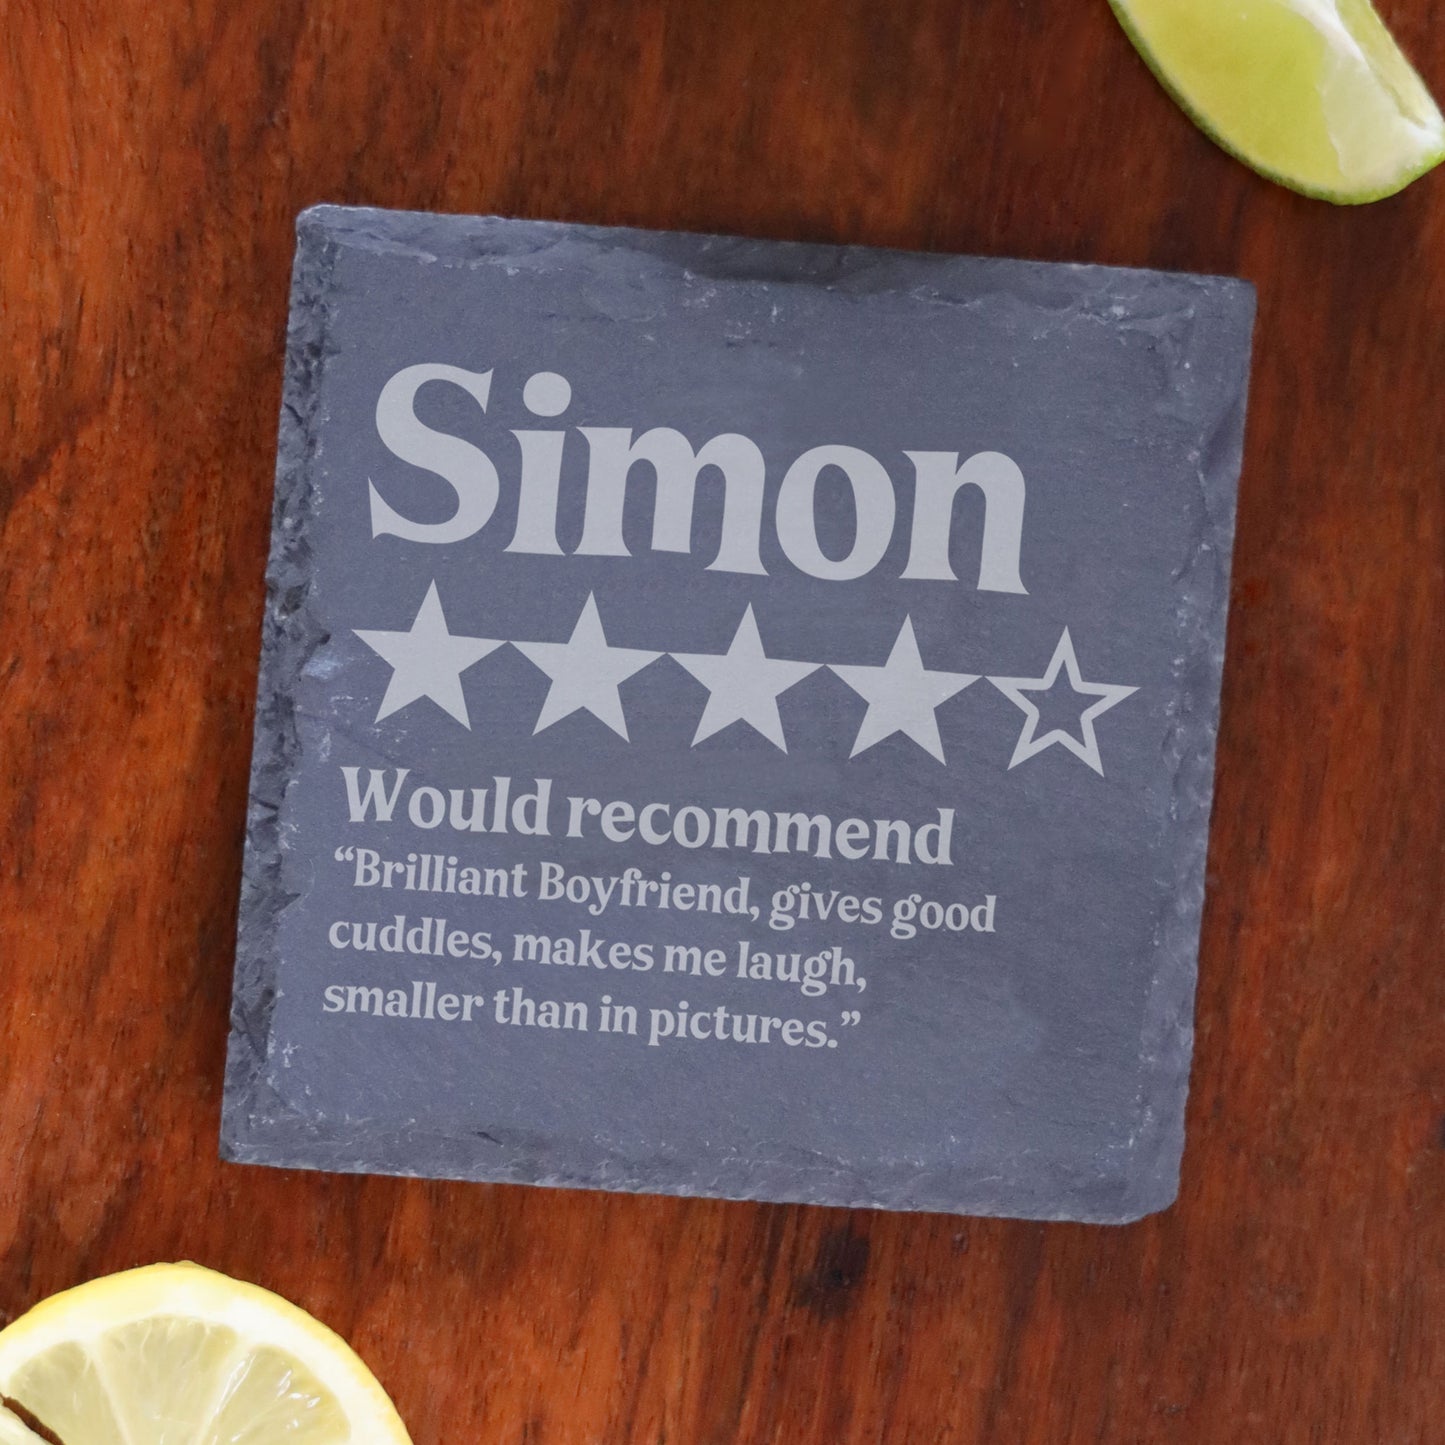 Personalised Novelty 5 Star Review Engraved Wine Glass and/or Coaster Set  - Always Looking Good - Square Coaster On Its Own  